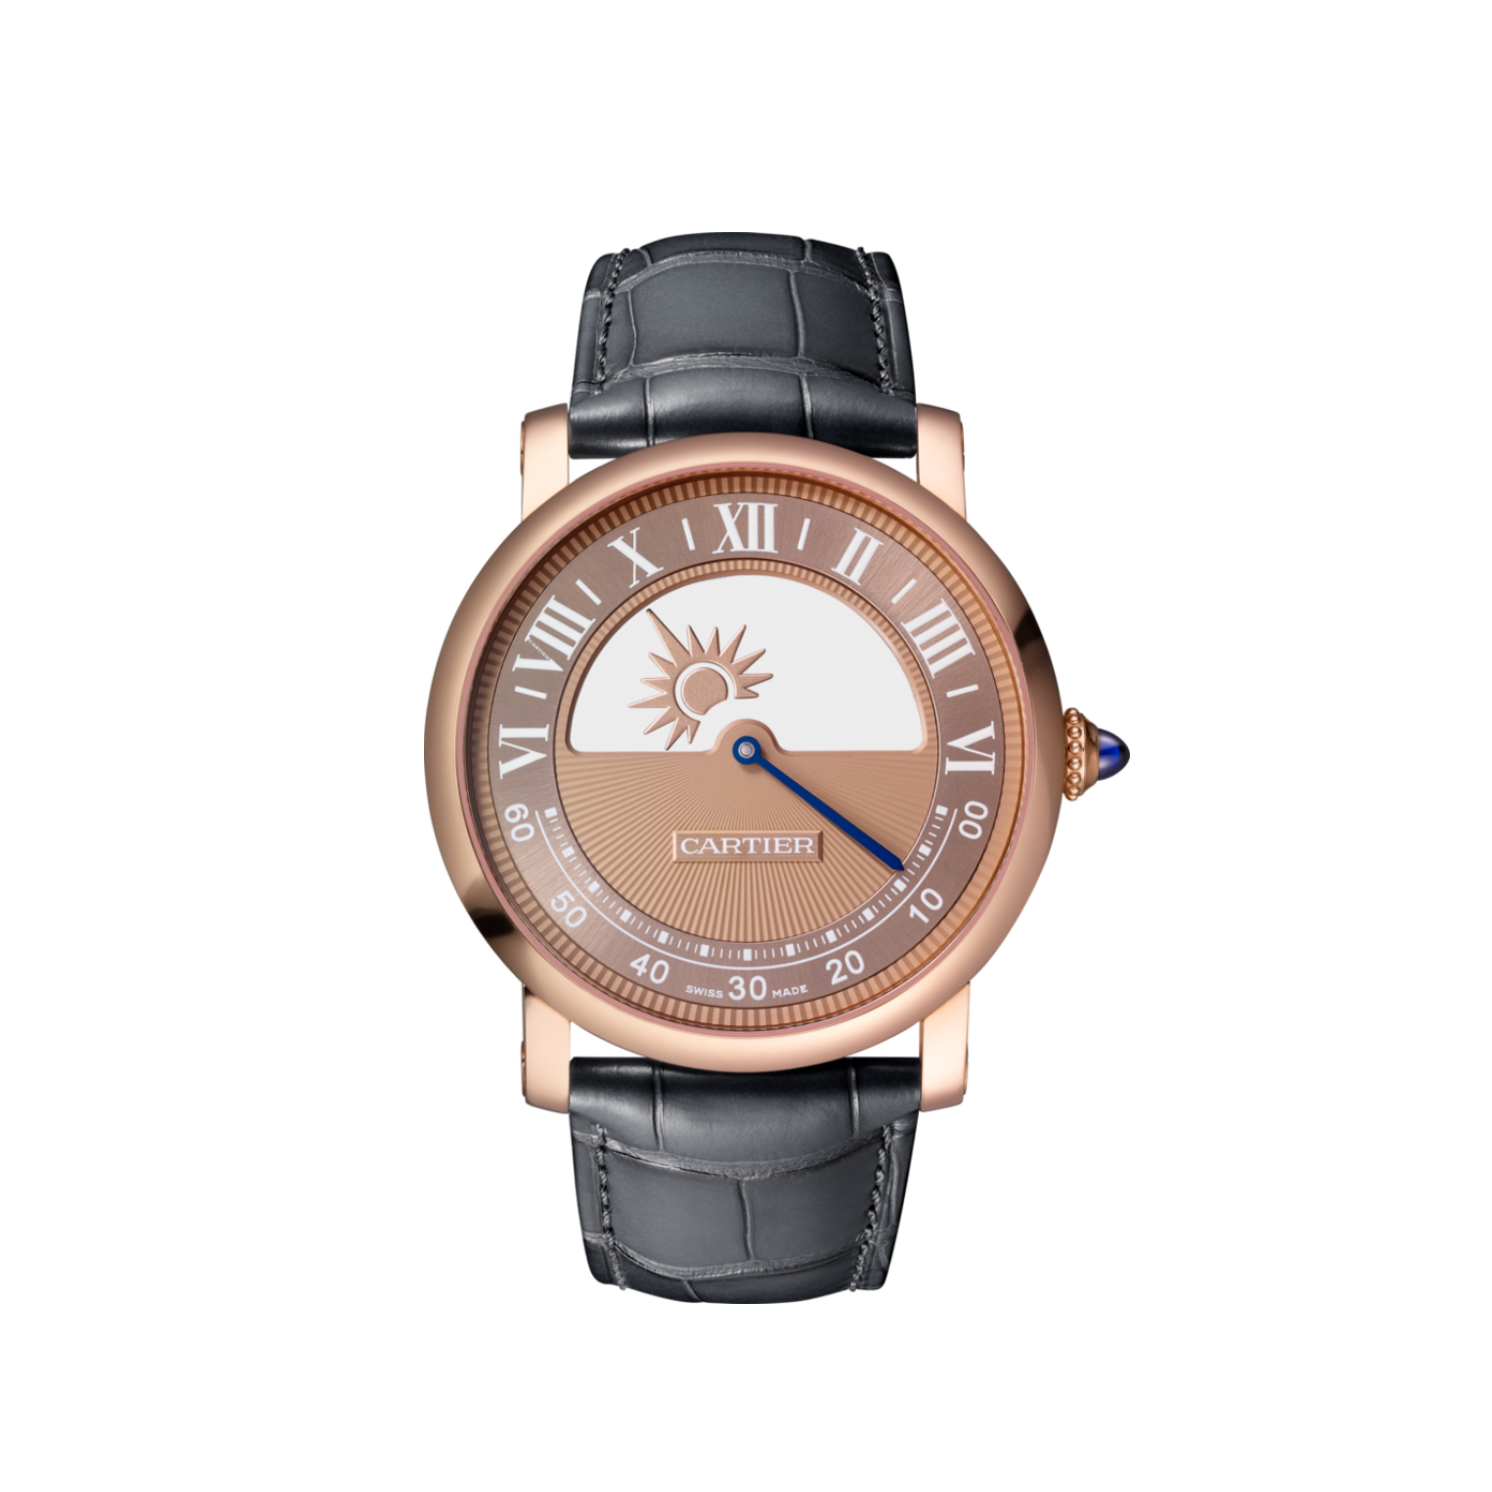 Picture of ROTONDE DE CARTIER MYSTERIOUS MOVEMENT - ROSE GOLD HAND-WOUND 40 MM